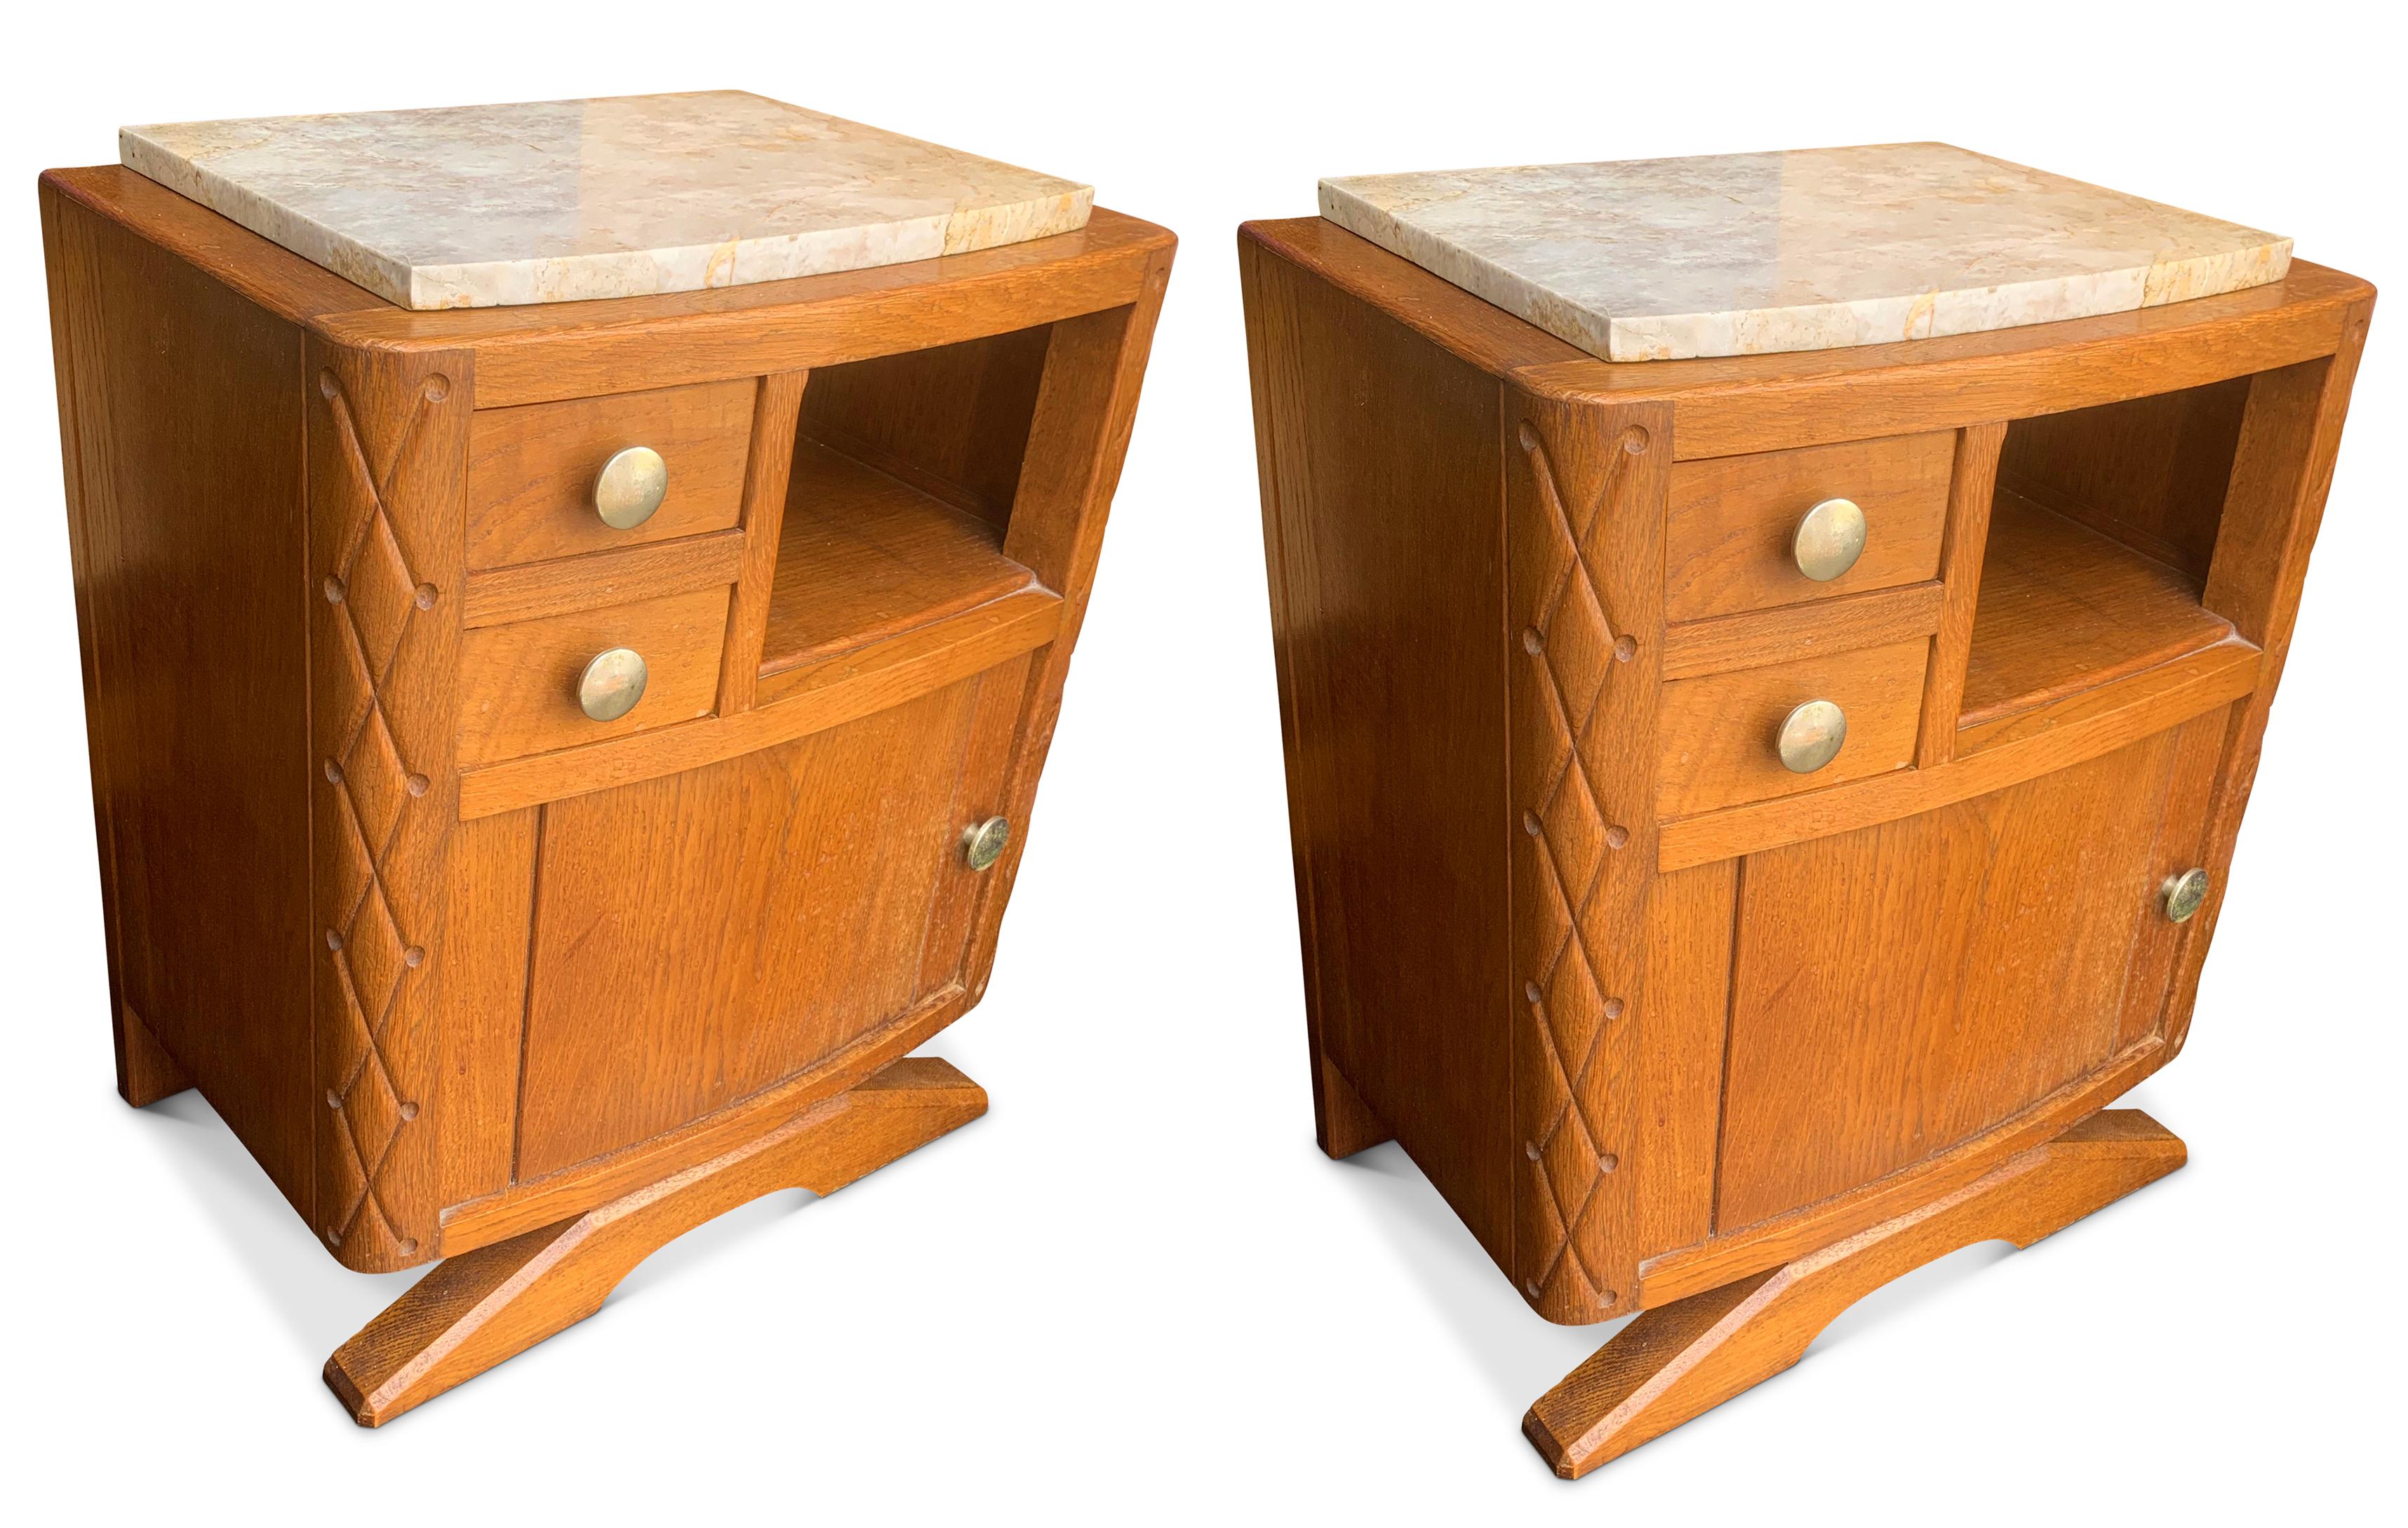 Pair of Art Deco limed oak, carved oak marble topped nightstands with two drawers & cupboard 1920s

Measures: height to top: 58 cm 
height to top of marble: 60 cm.